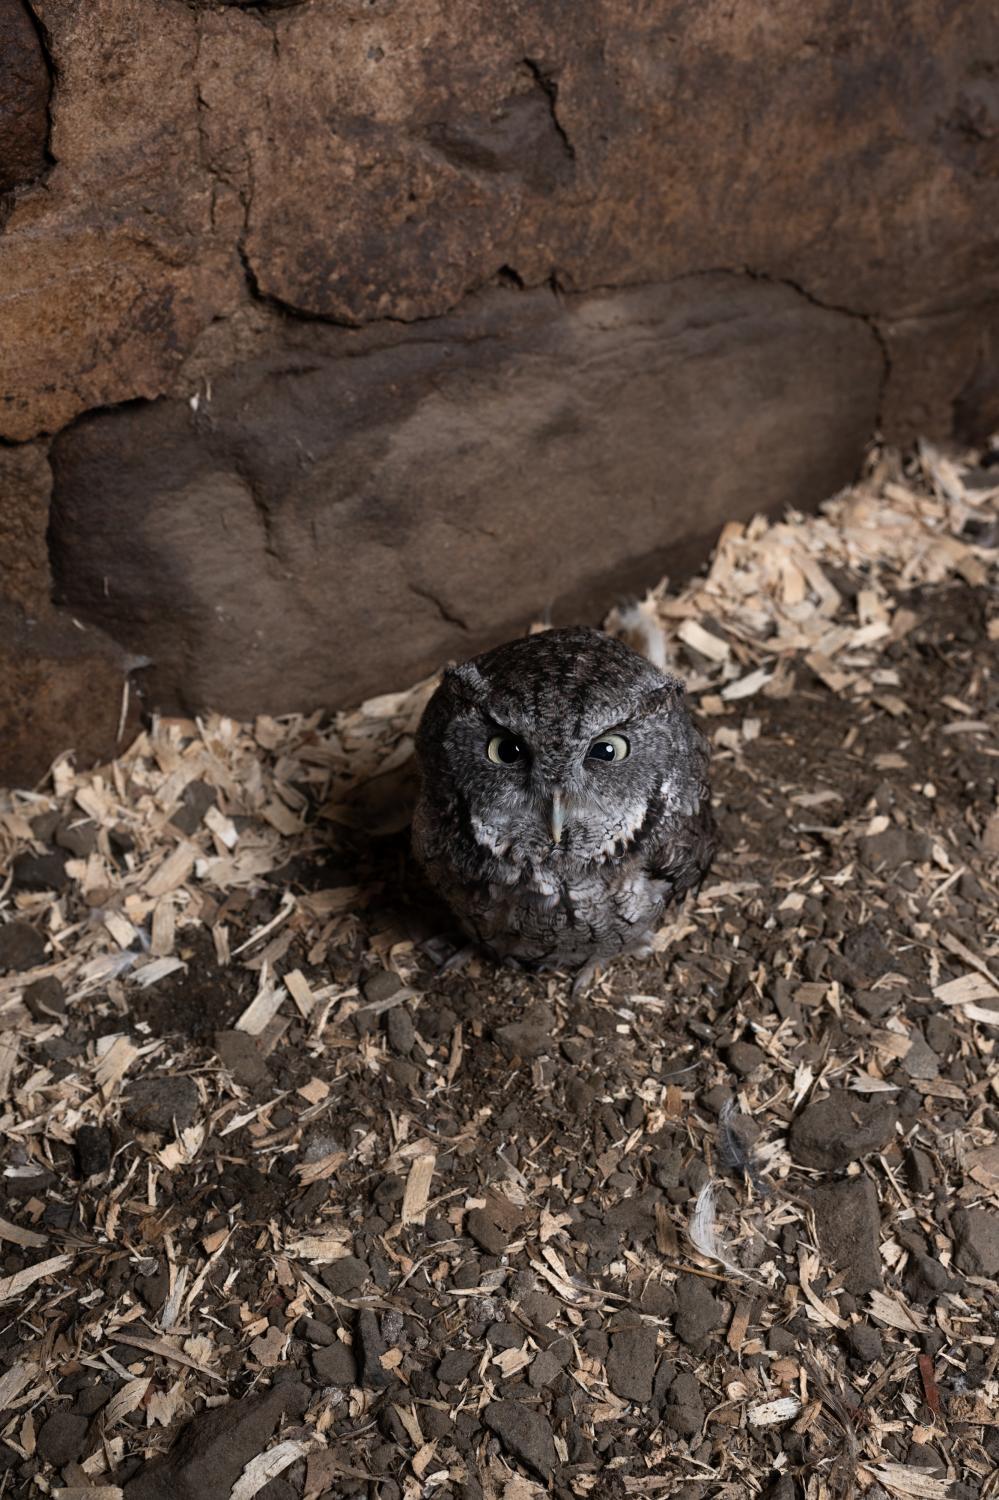 It Takes a Village - A baby screech owl found on the street.